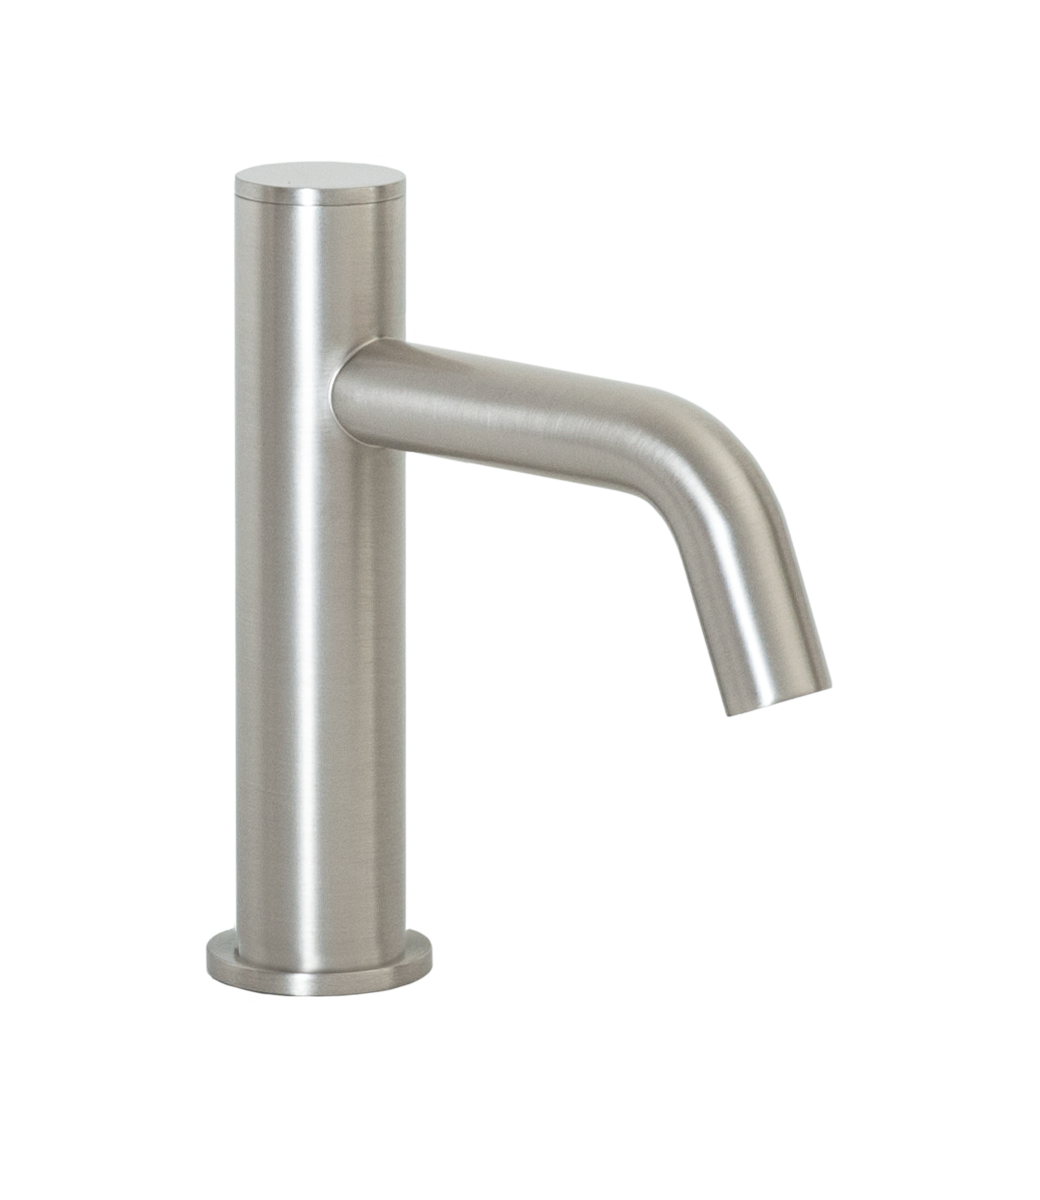 FA-3260 Automatic Faucet with 6” Spout Reach in Satin Nickel